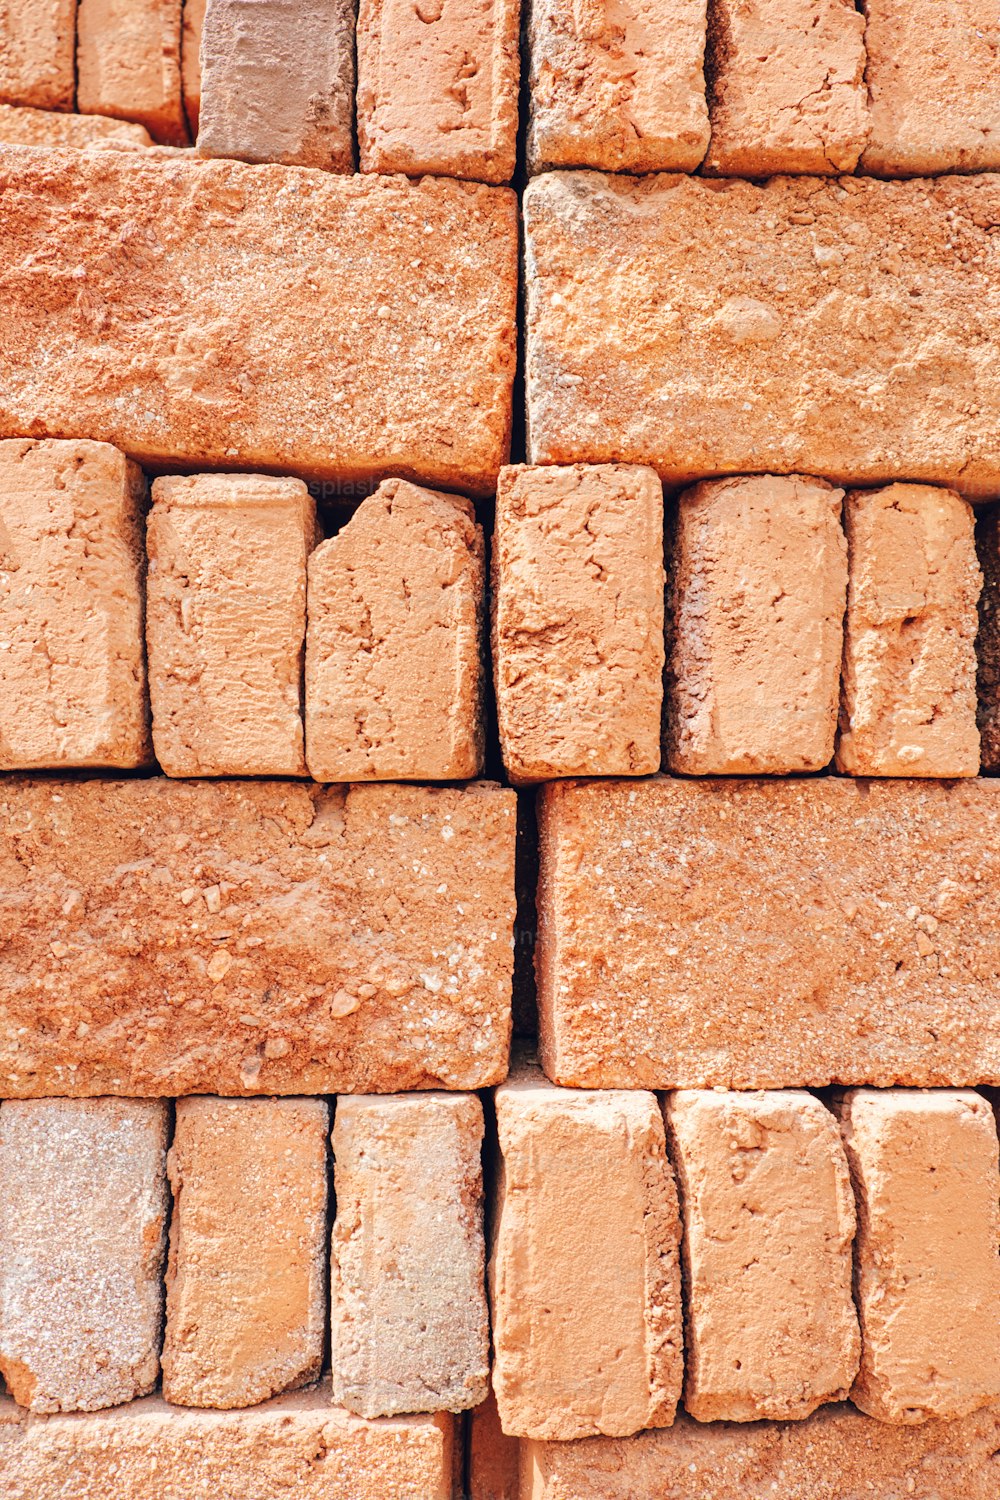 a pile of bricks stacked on top of each other